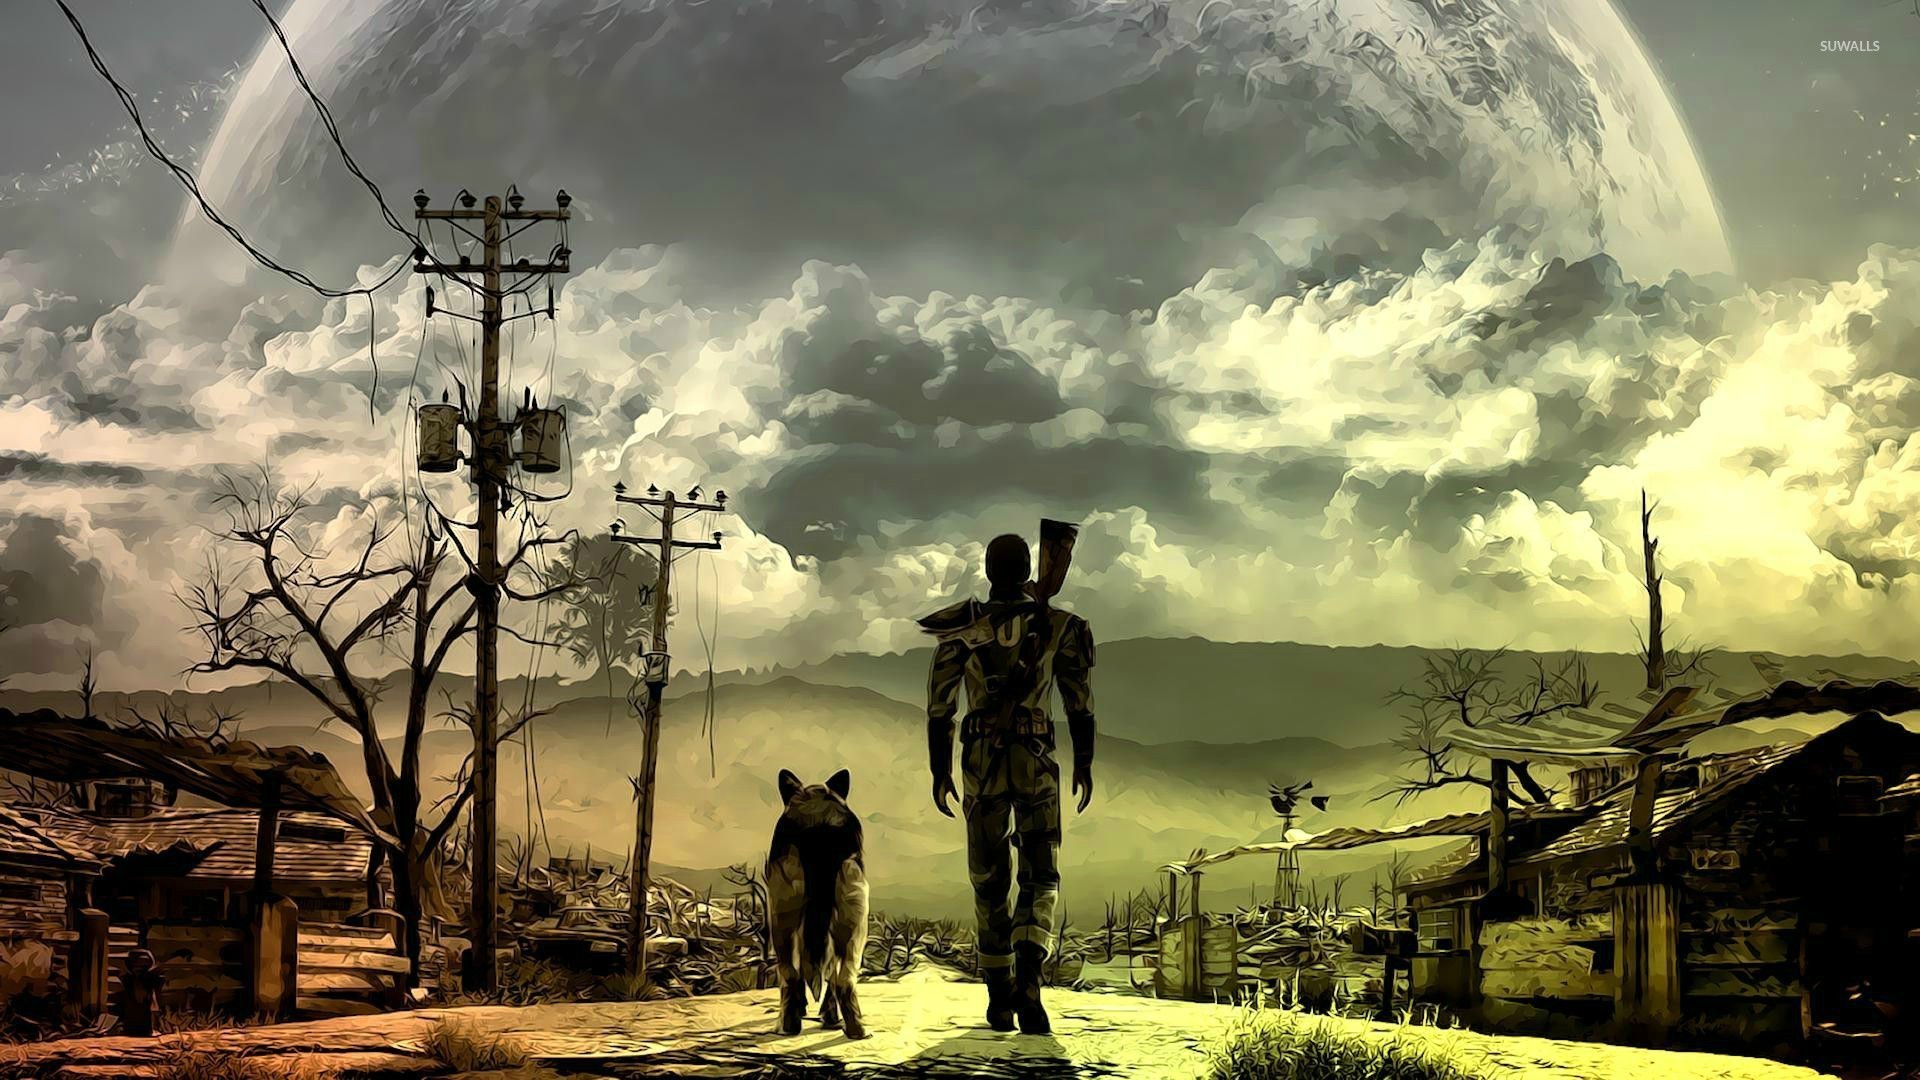 1920x1080 Fallout 3 [3] wallpaper - Game wallpapers - #28477